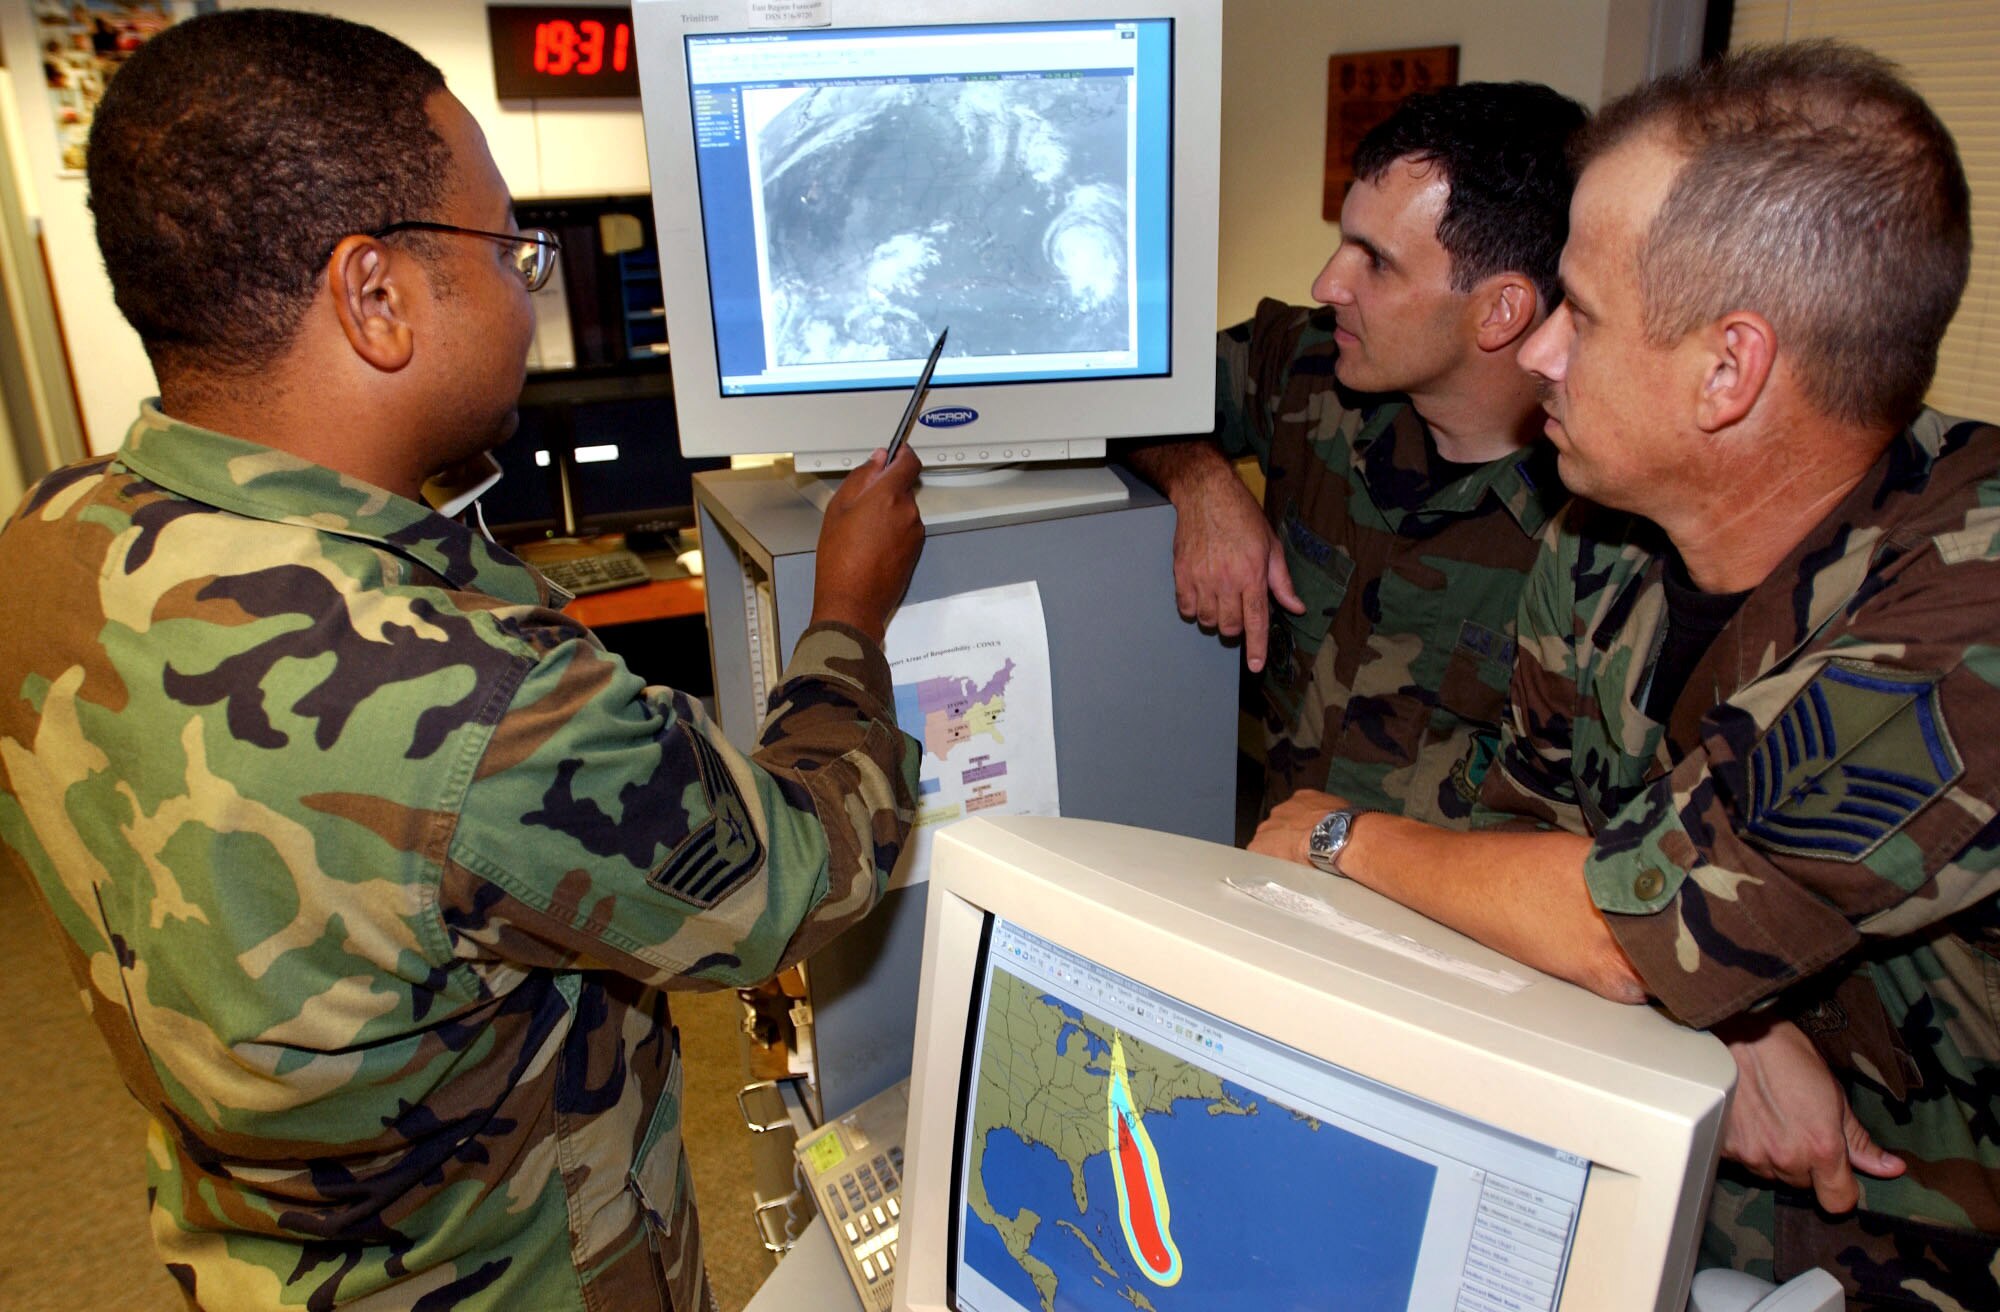 DOVER AIR FORCE BASE, Del. -- Staff Sgt. Jason Bowry points out the projected pathway of Hurricane Isabel to Capt. Paul Gifford and Master Sgt. Arlen Lewis.  All three work in the 436th Operations Support Squadron's weather flight here.  (U.S. Air Force photo by Kristin Royalty)